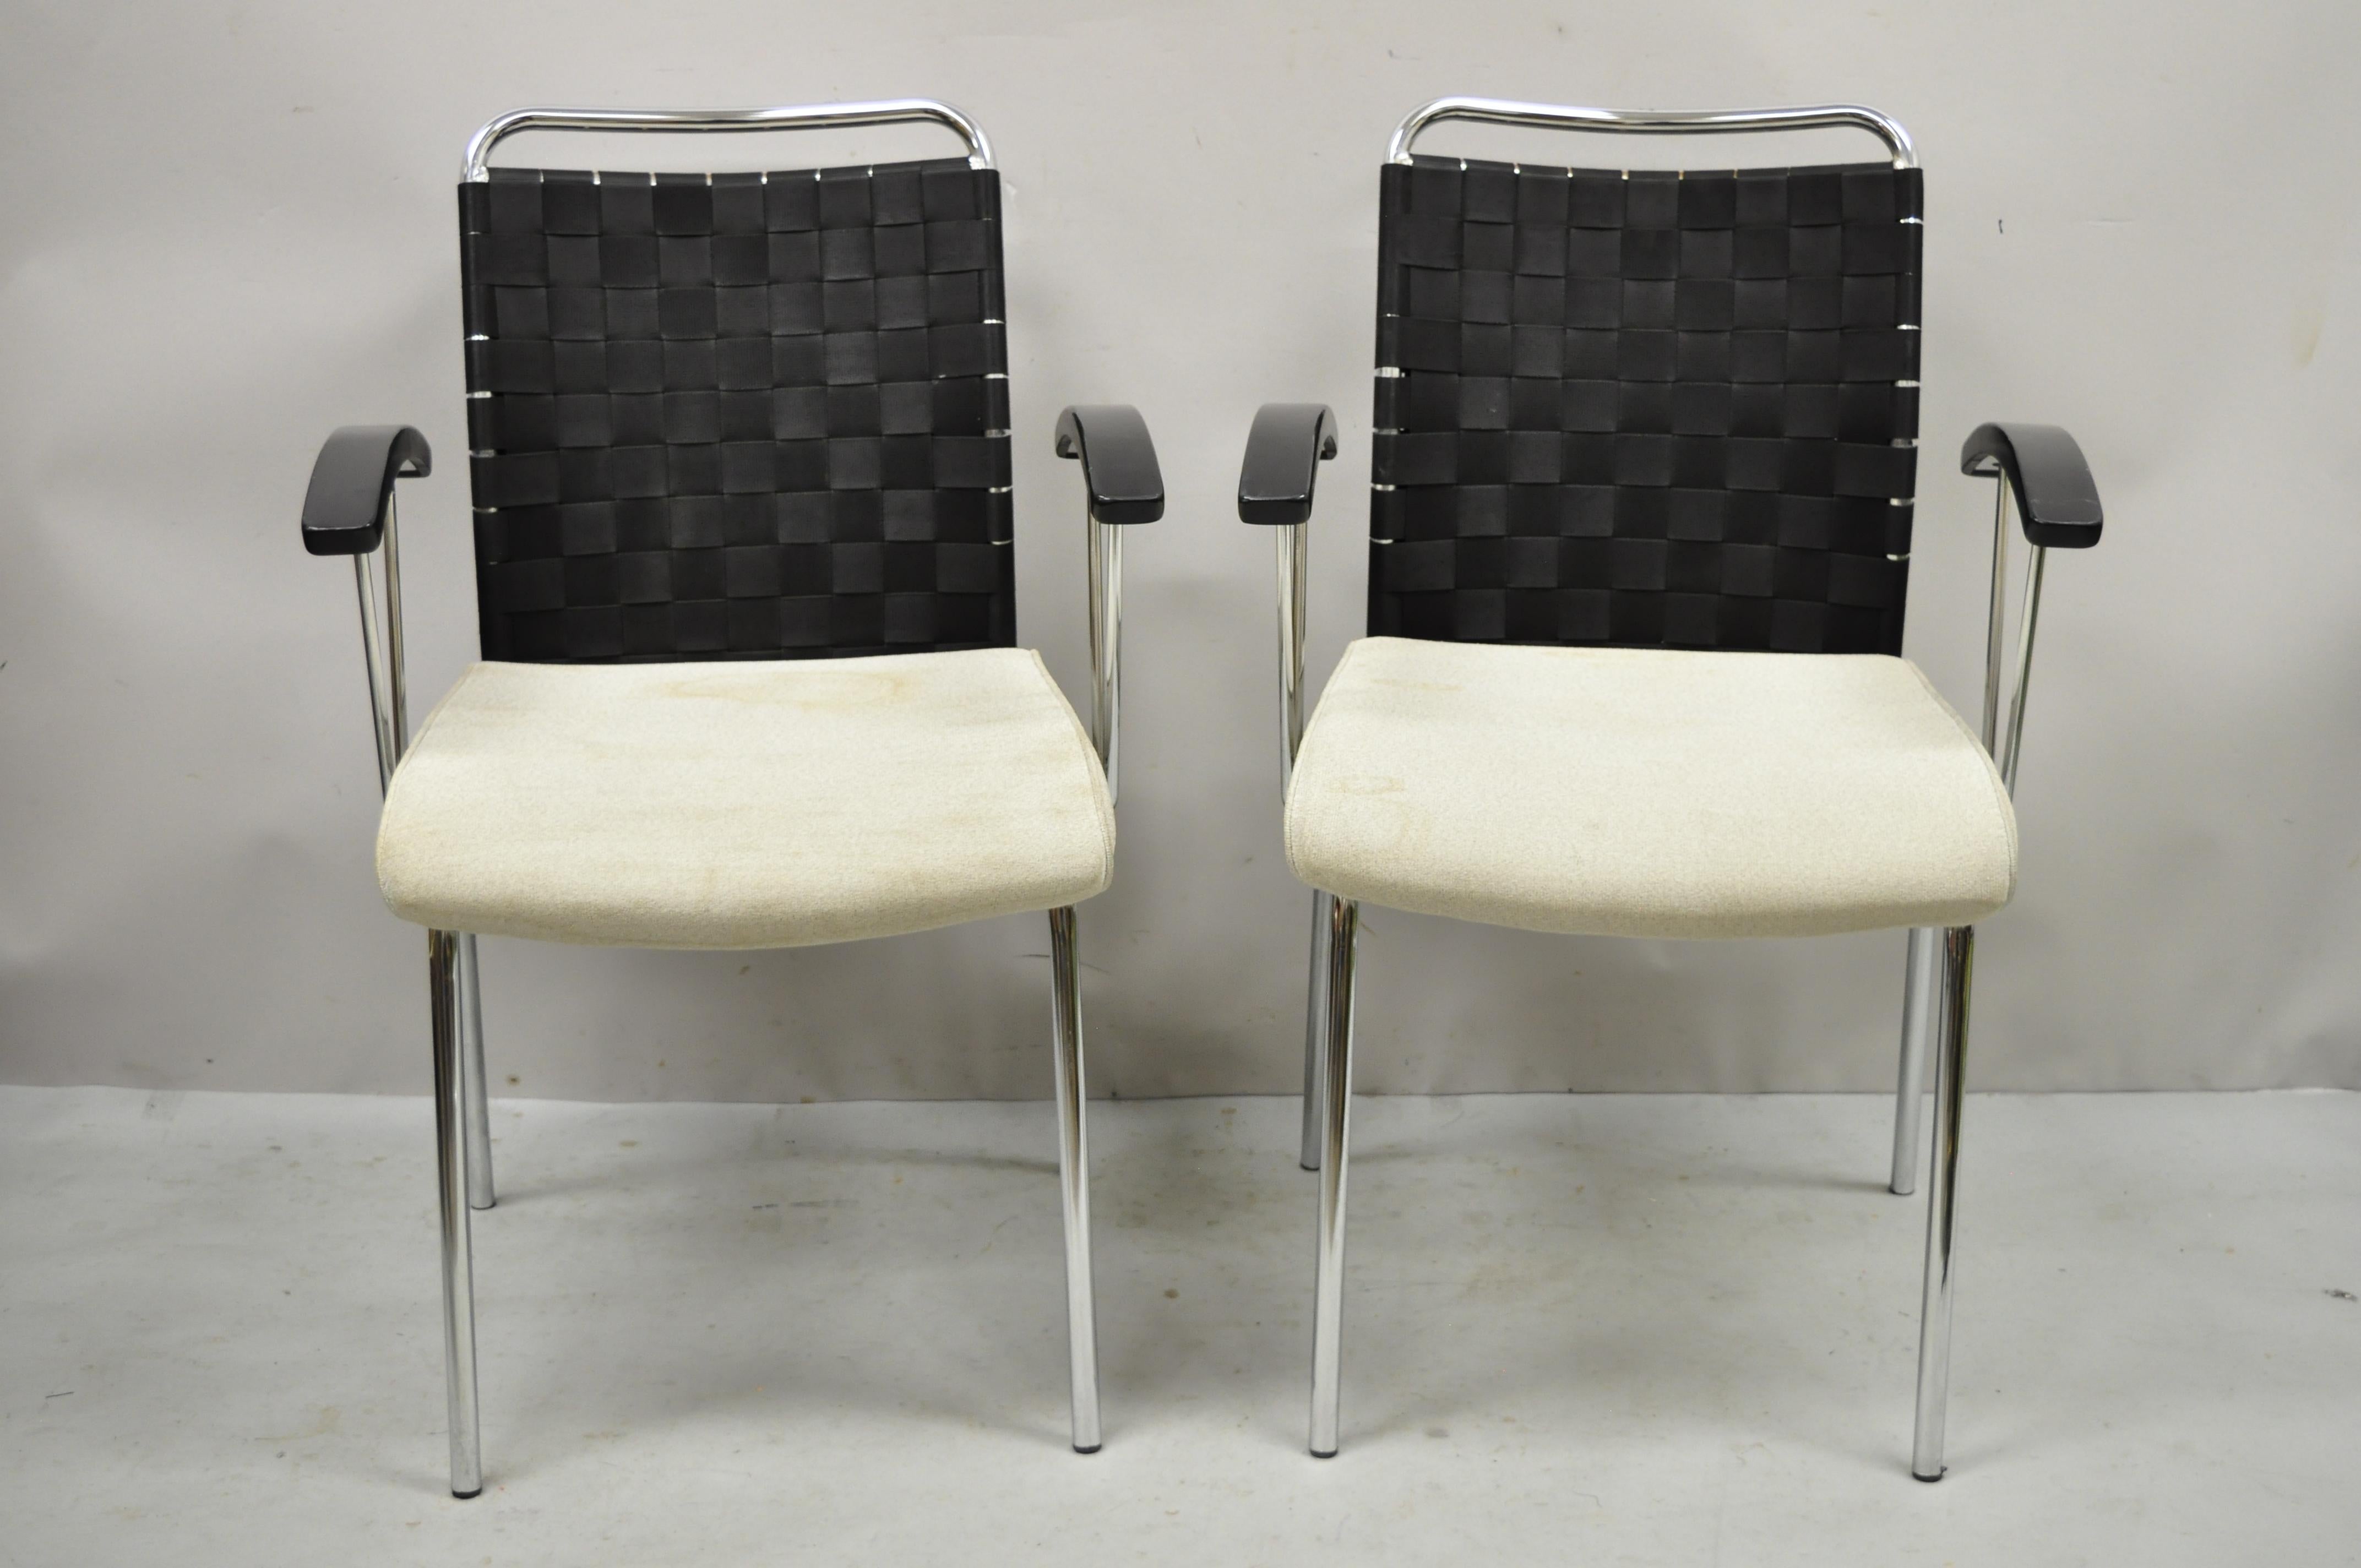 Vintage Mid Century Modern Italian Style woven back chrome frame arm chairs - a Pair. Item features woven fabric backs, solid wood armrests, upholstered seat, chrome metal steel frame, clean modernist lines, quality craftsmanship, great style and